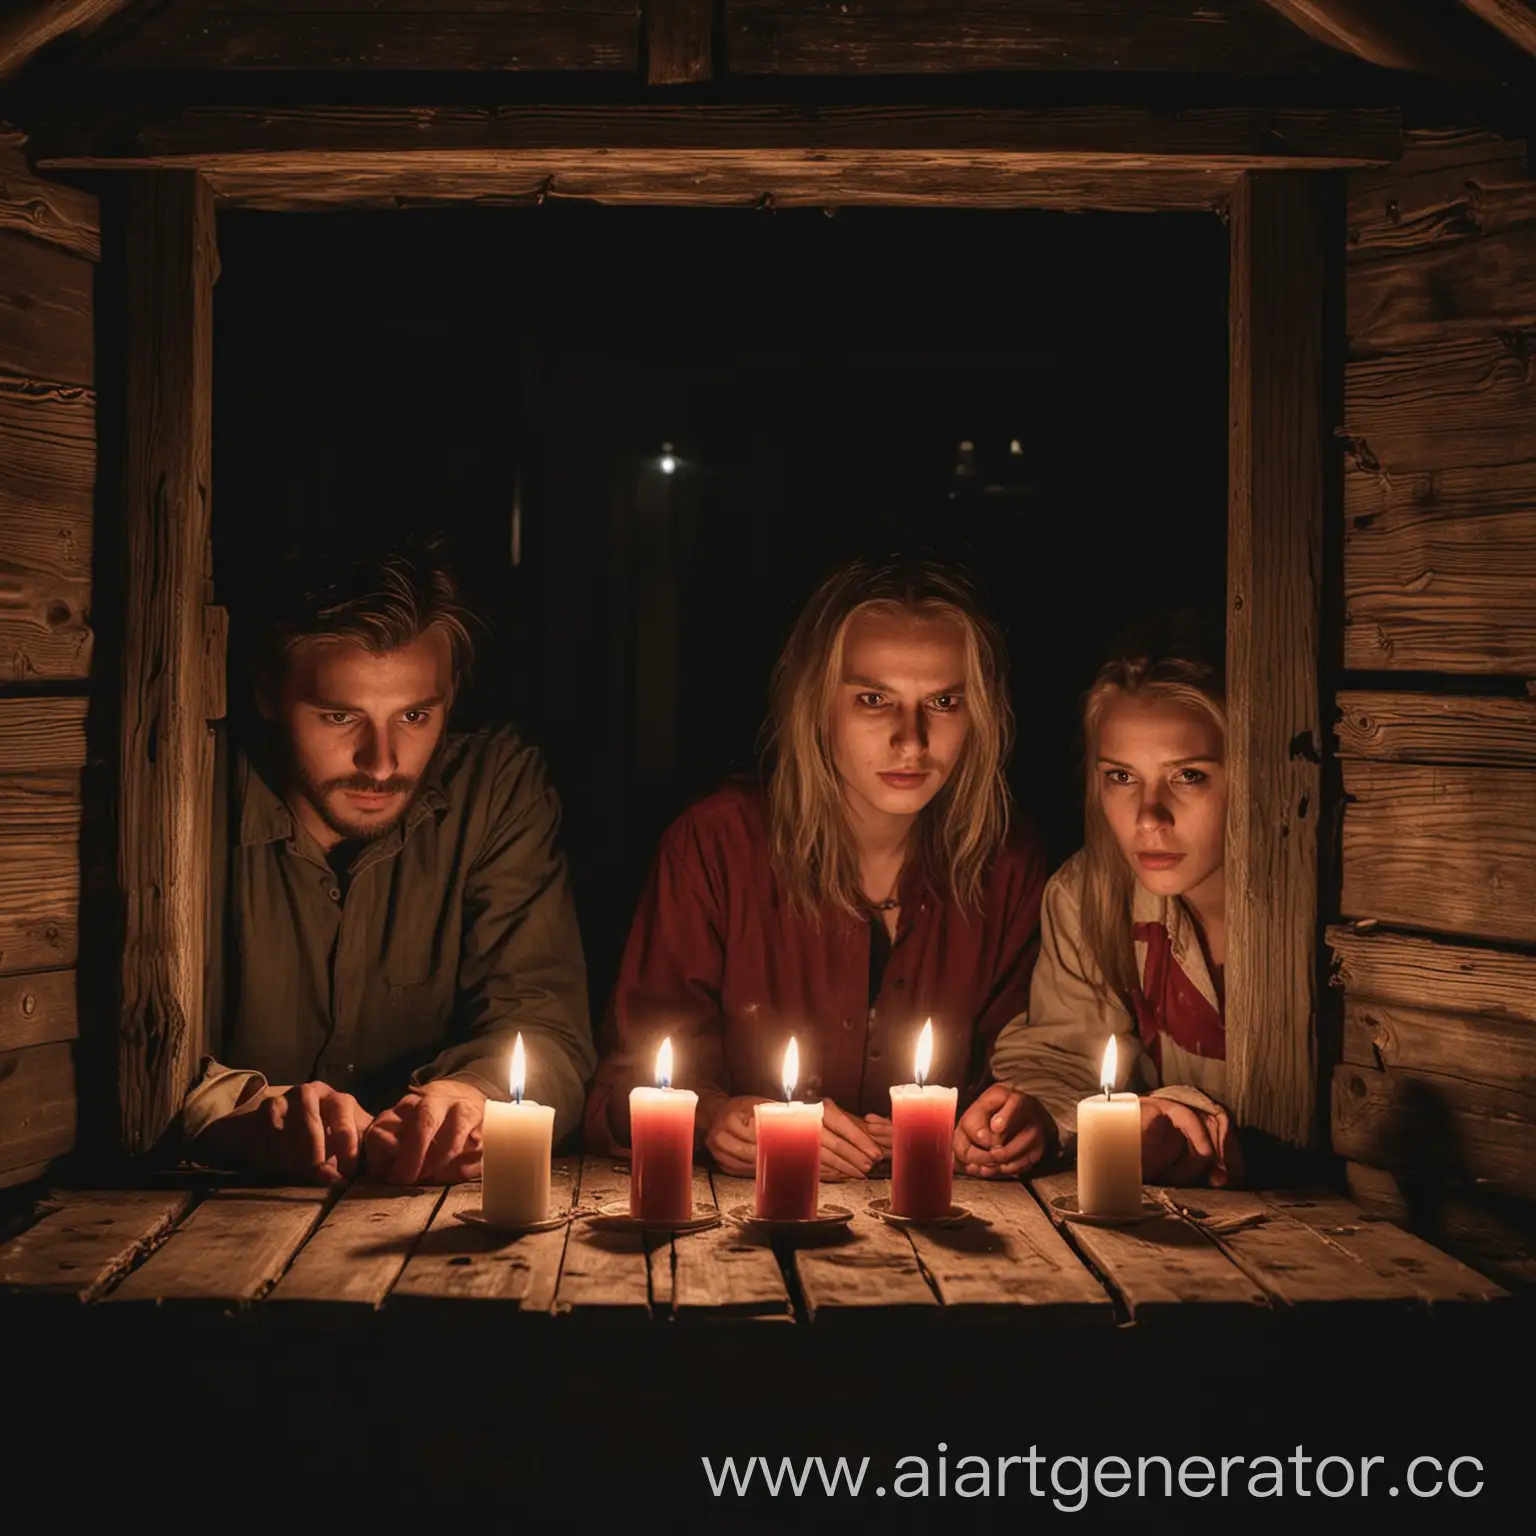 Three-Recidivists-Sitting-in-Wooden-Hut-at-Night-with-Candles